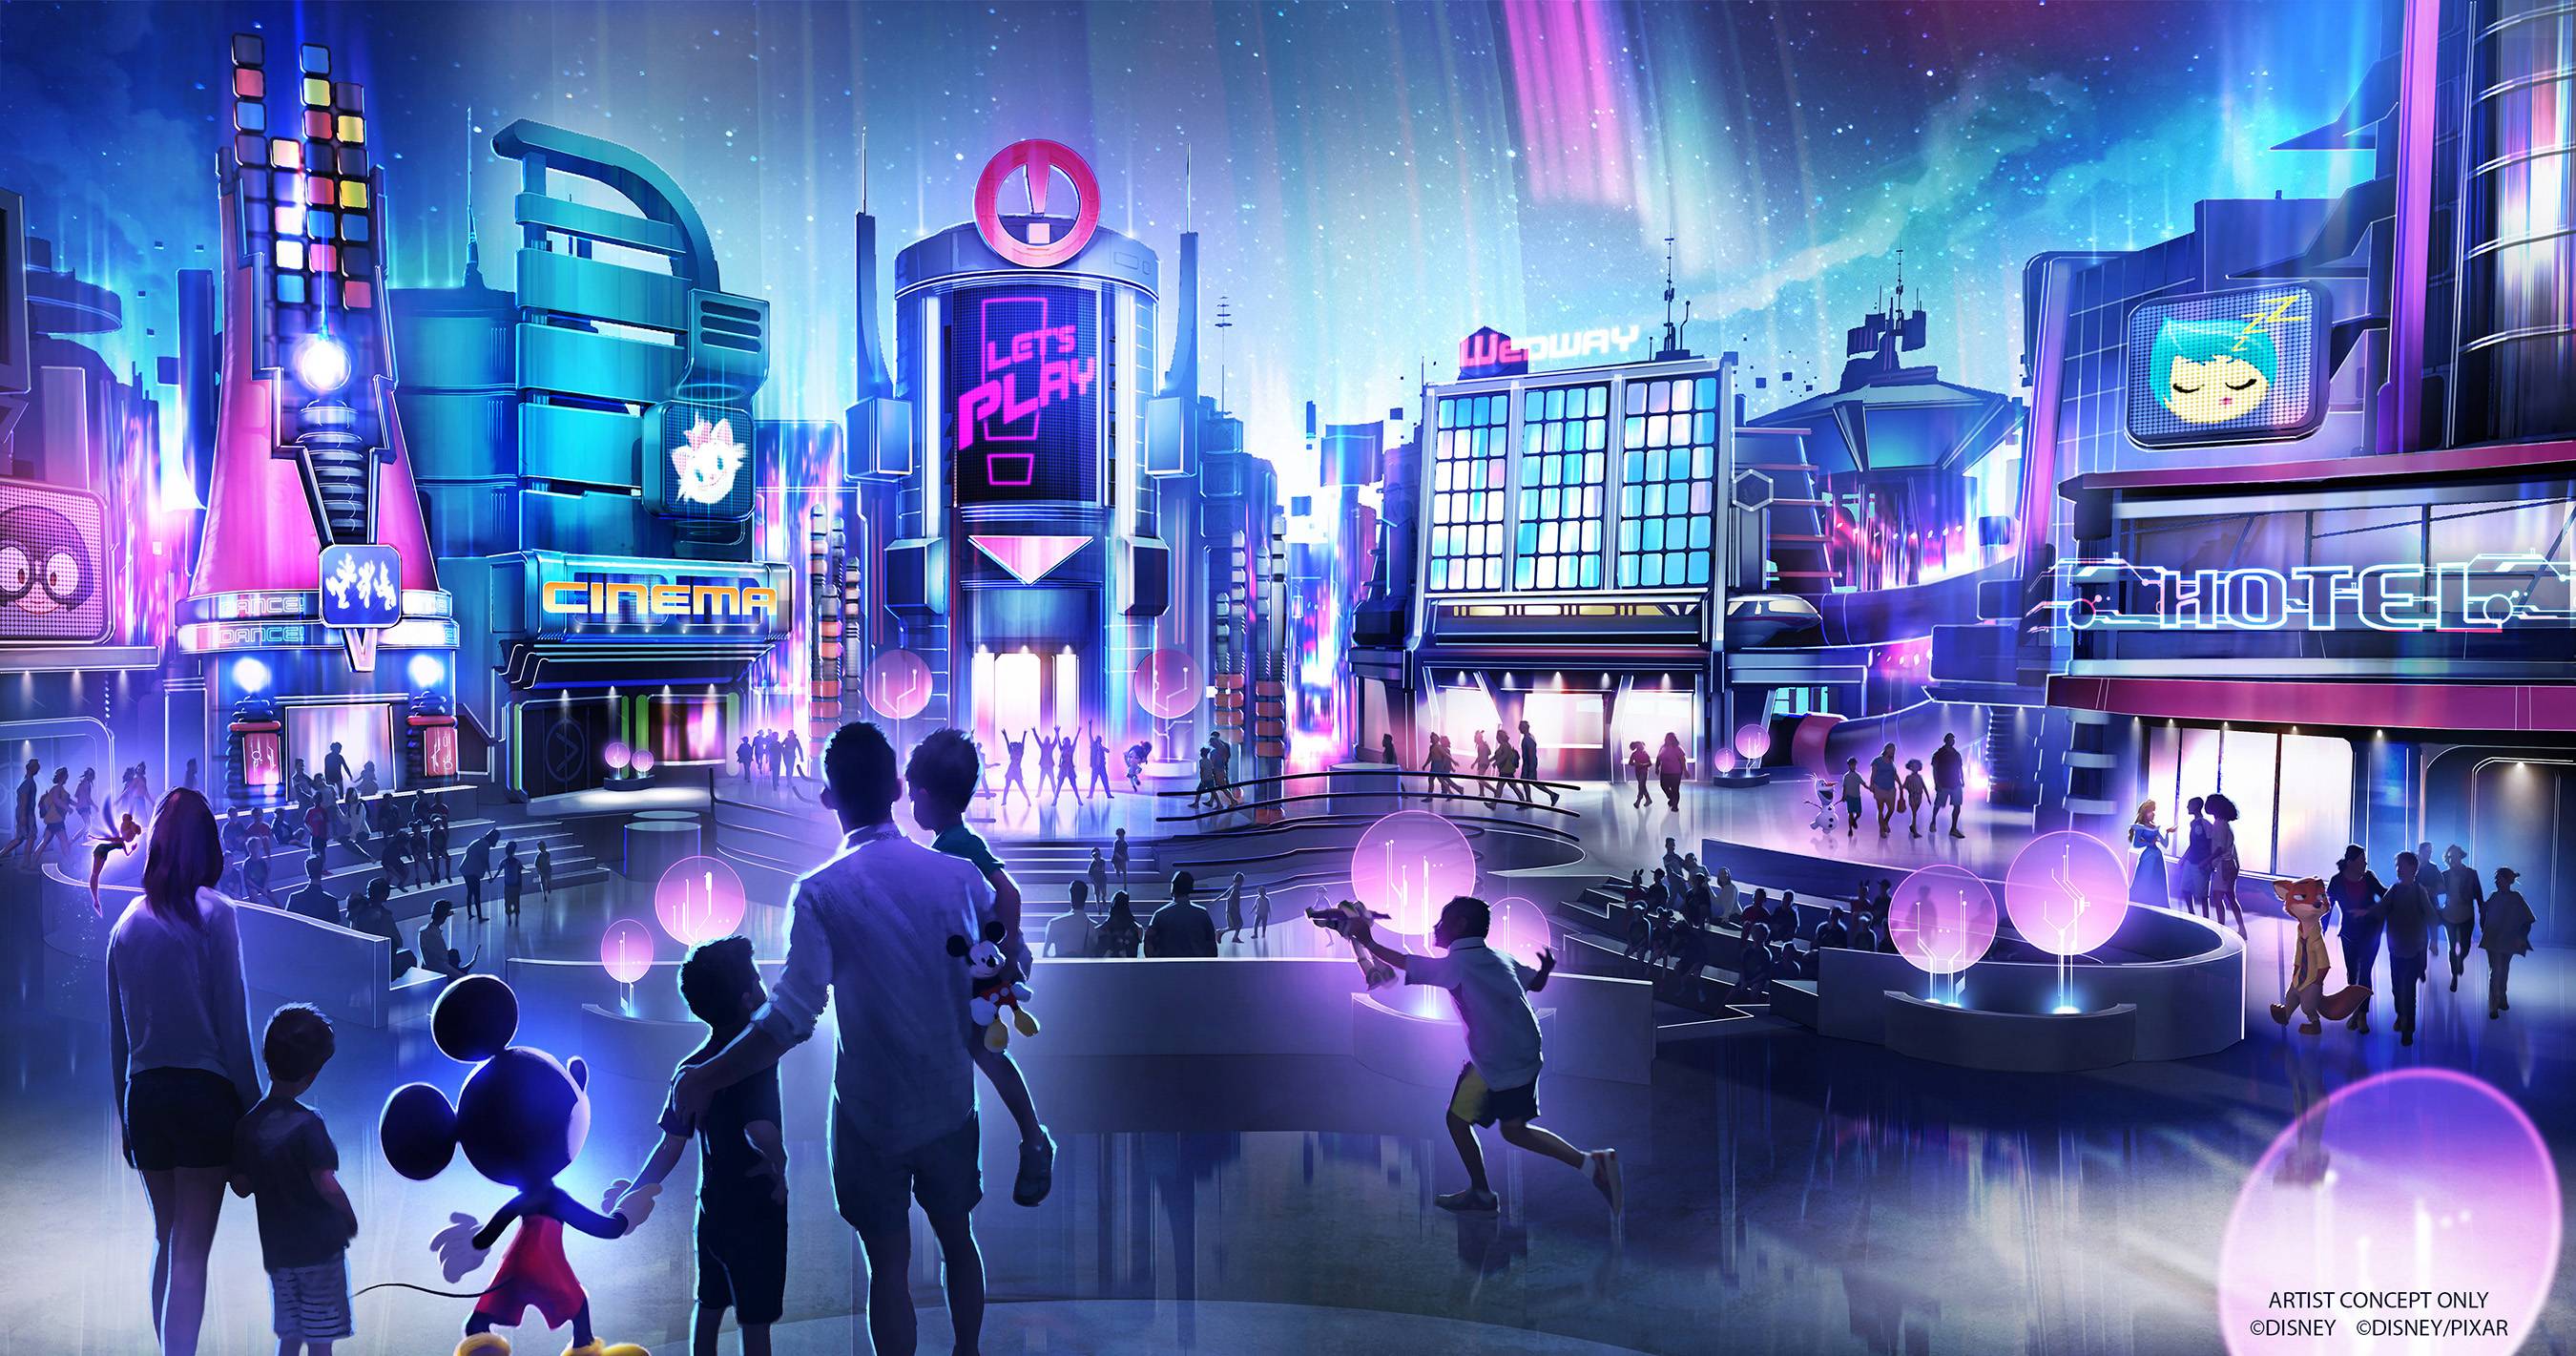 New Play Pavilion to replace Epcot's Wonder of Life